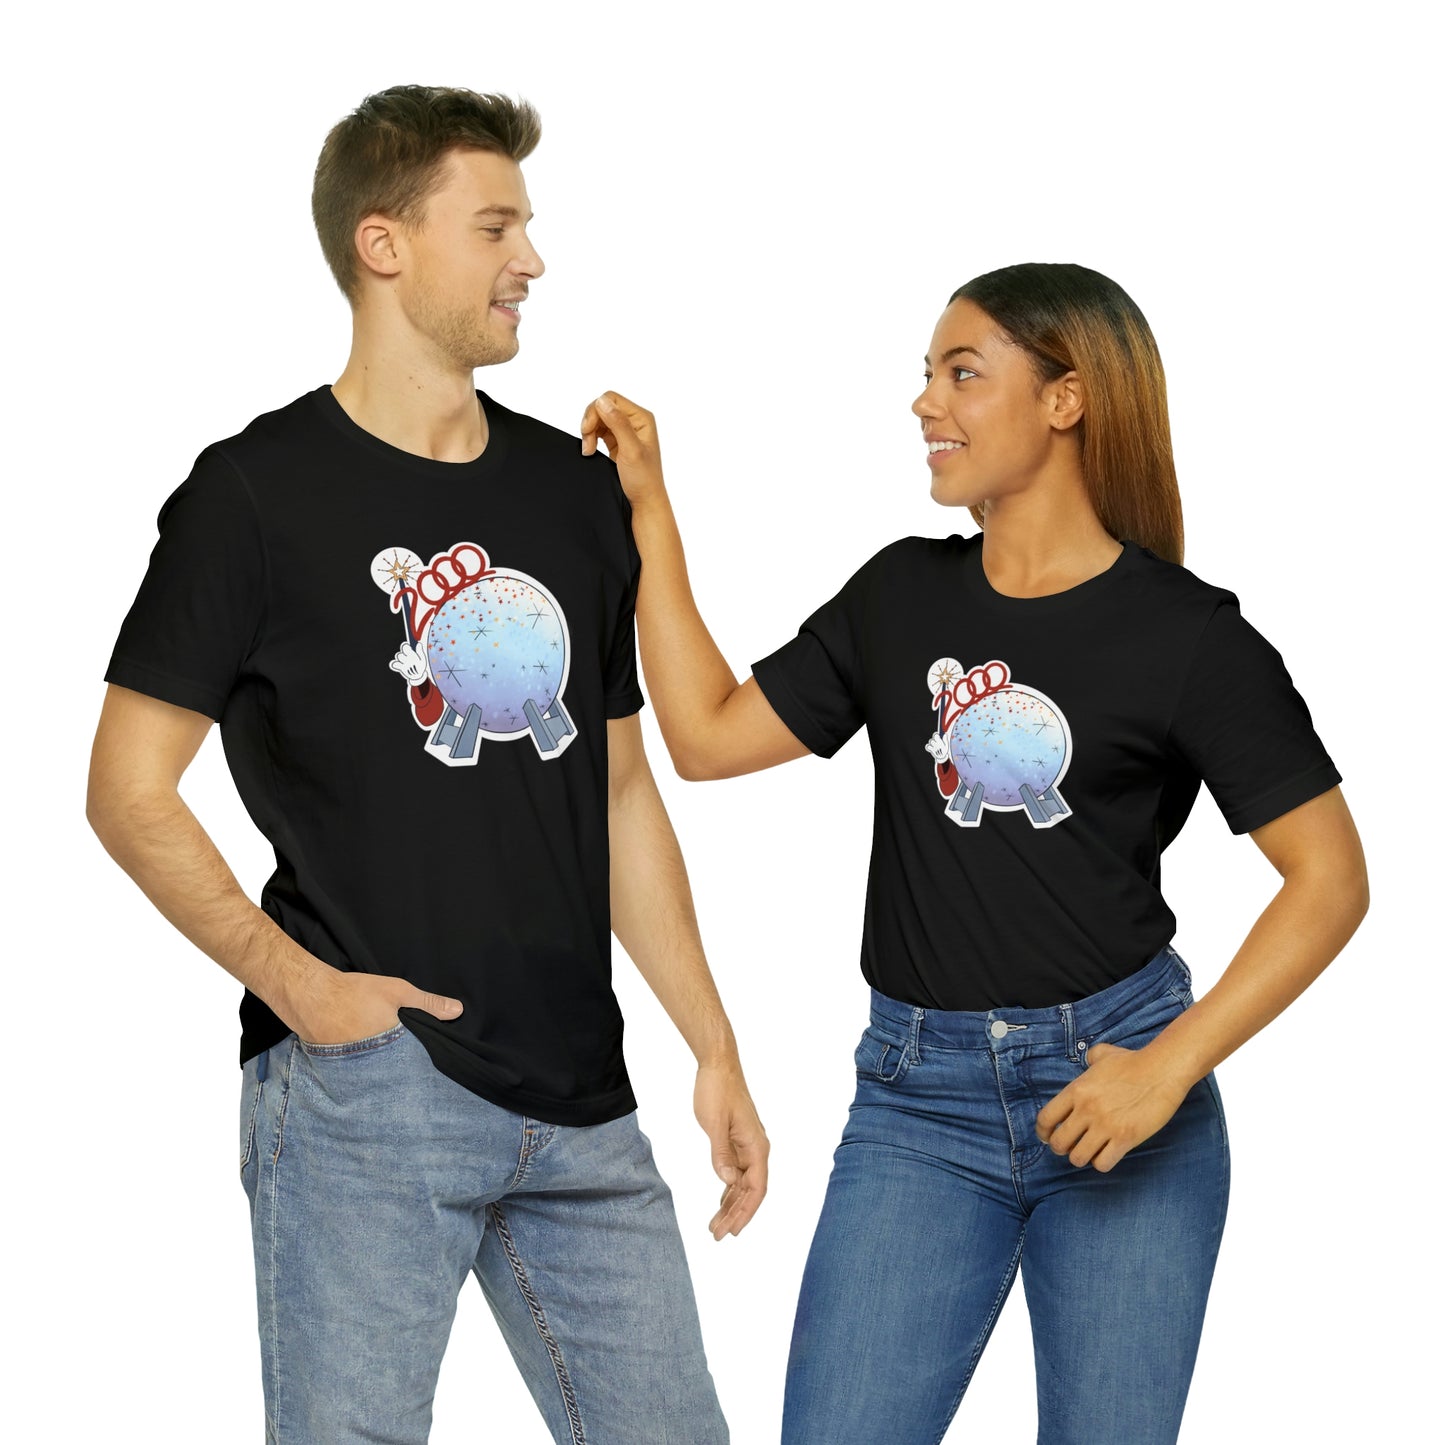 Epcot wand shirt mens and Womens fit in black 